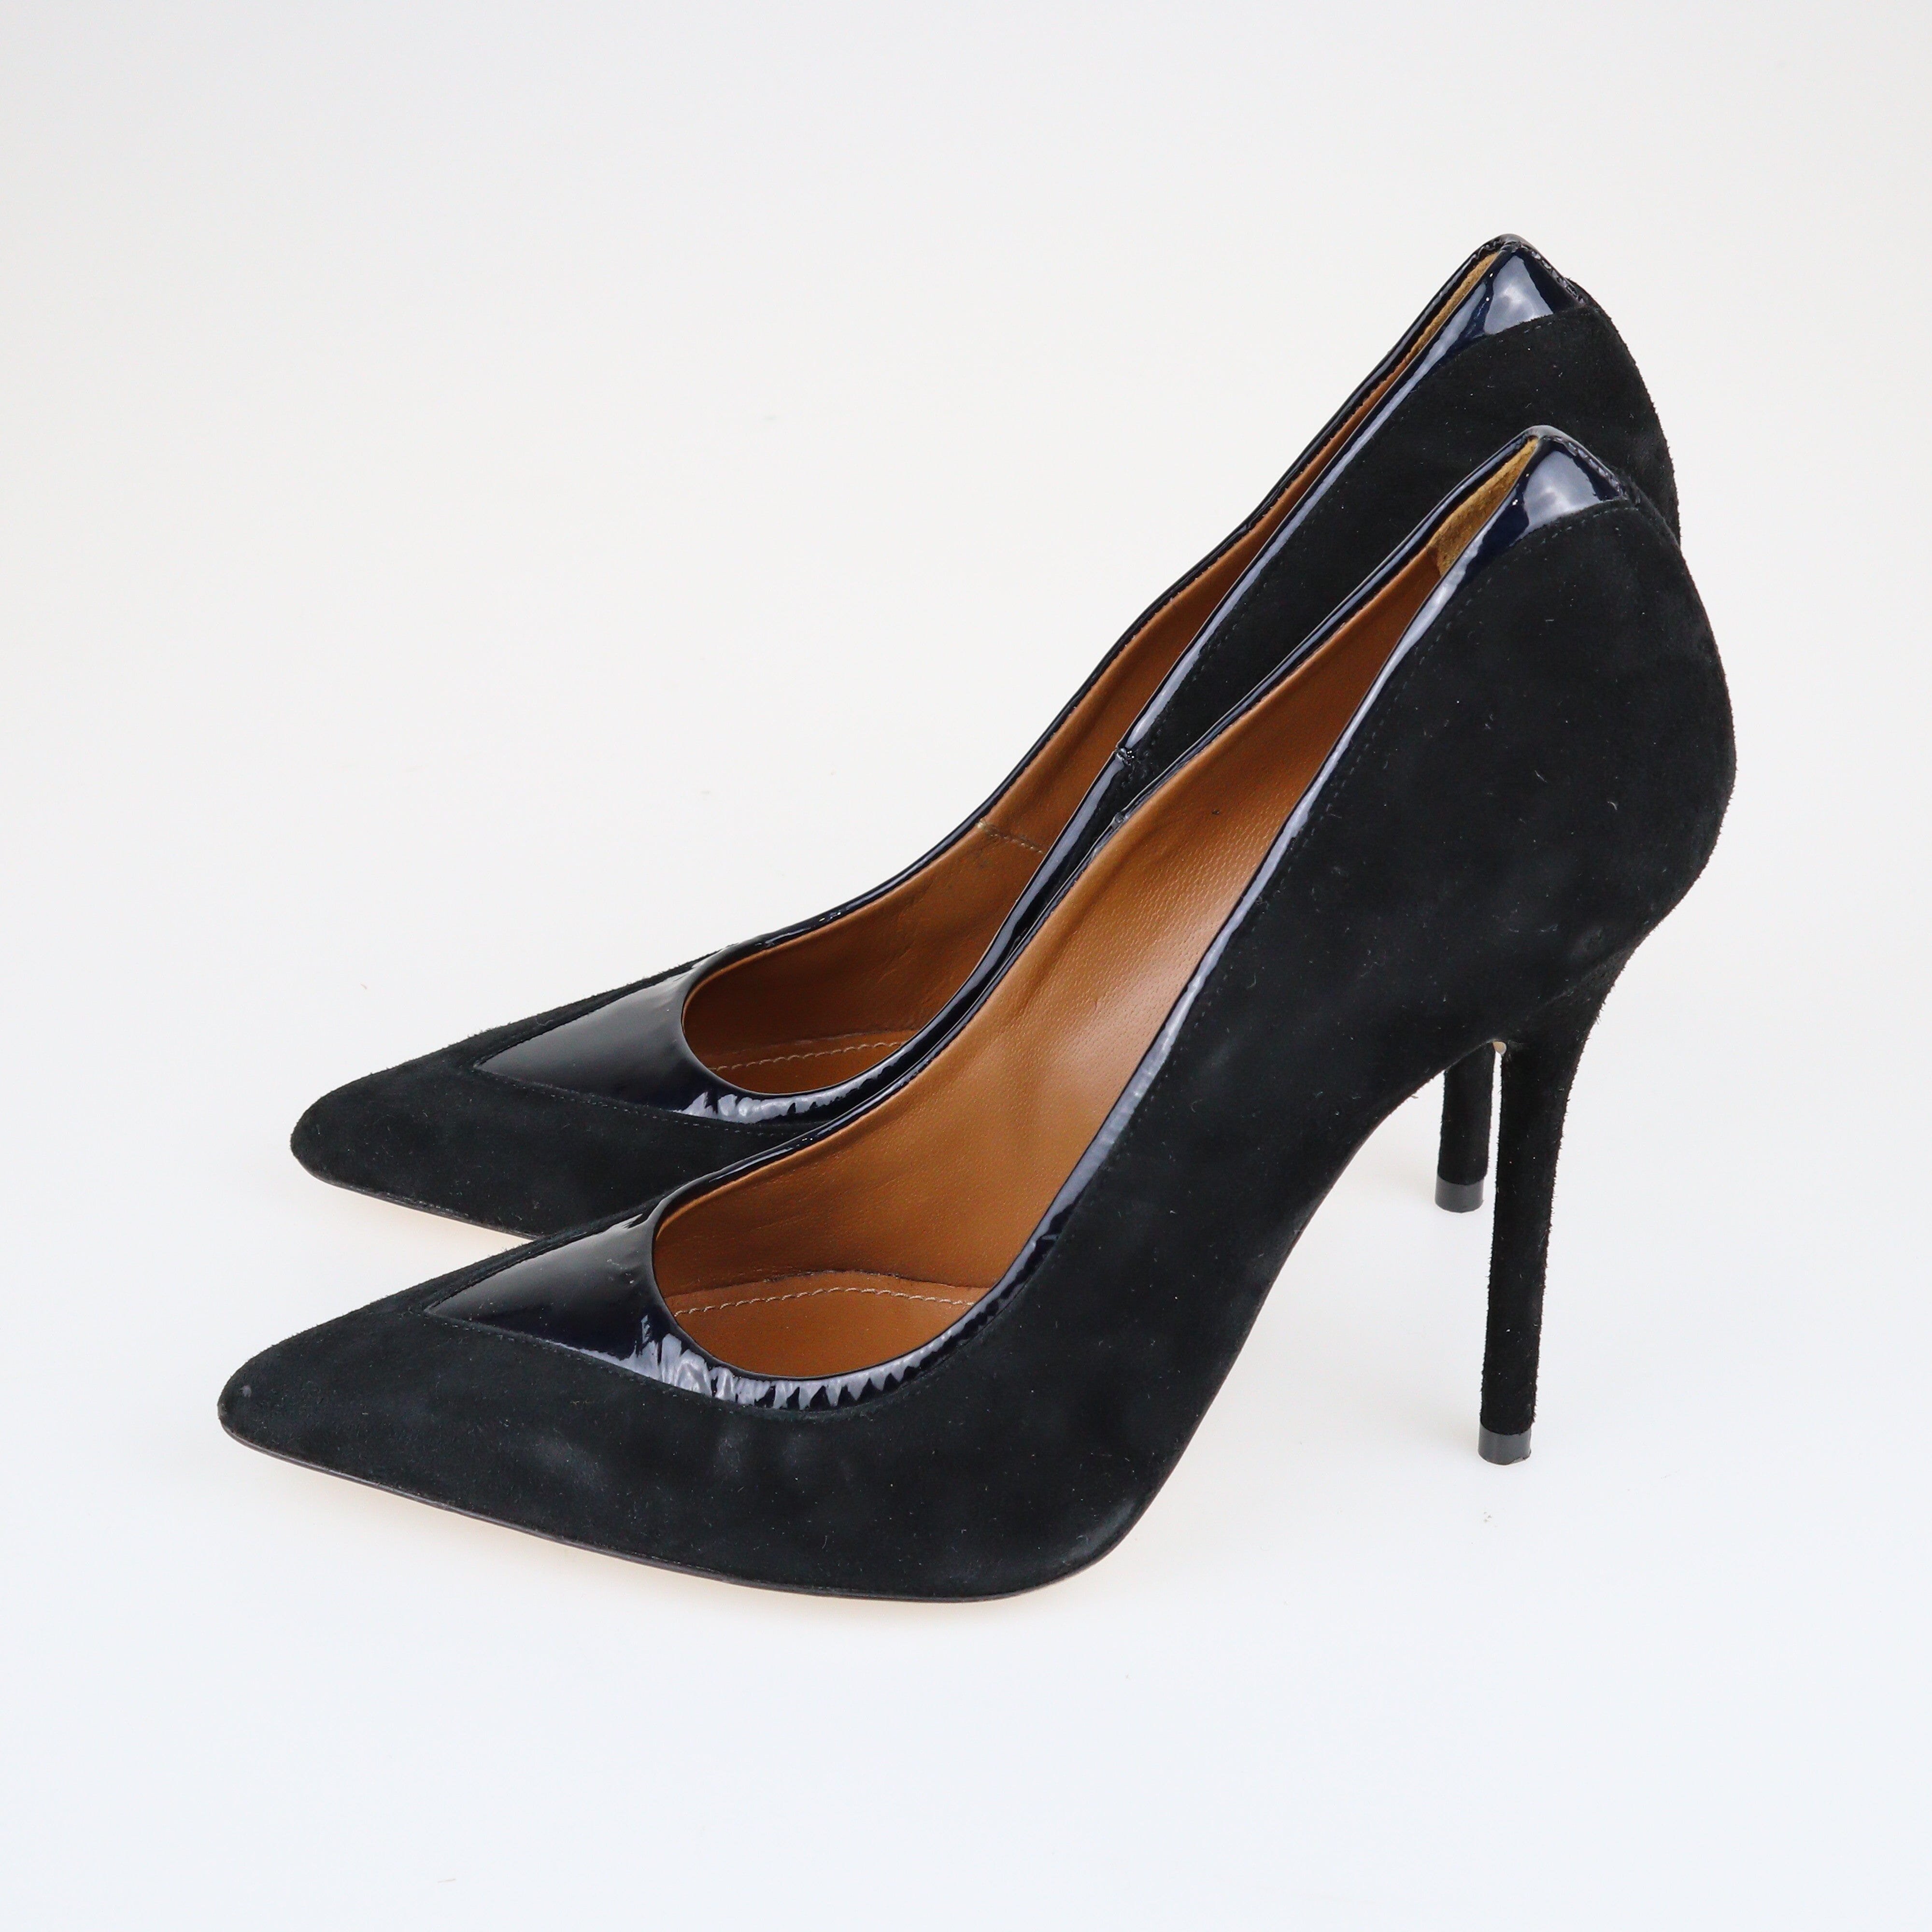 Black Pointed Toe Pumps Shoes Malone Souliers 